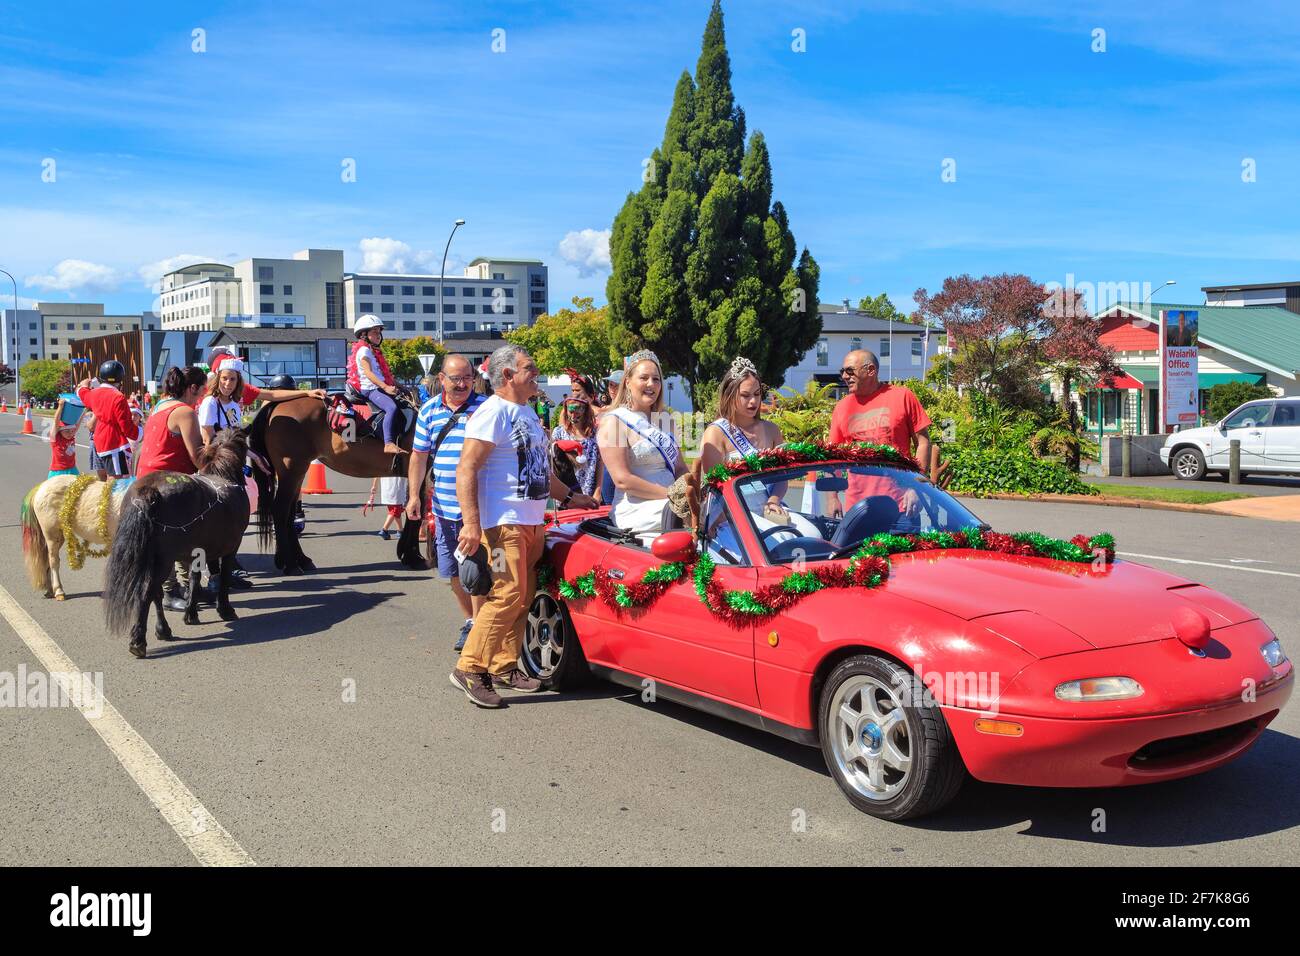 A Christmas parade in Rotorua, New Zealand.  Two beauty queens, 'Mrs. New Zealand' and 'Miss Teen New Zealand' riding in a decorated car Stock Photo